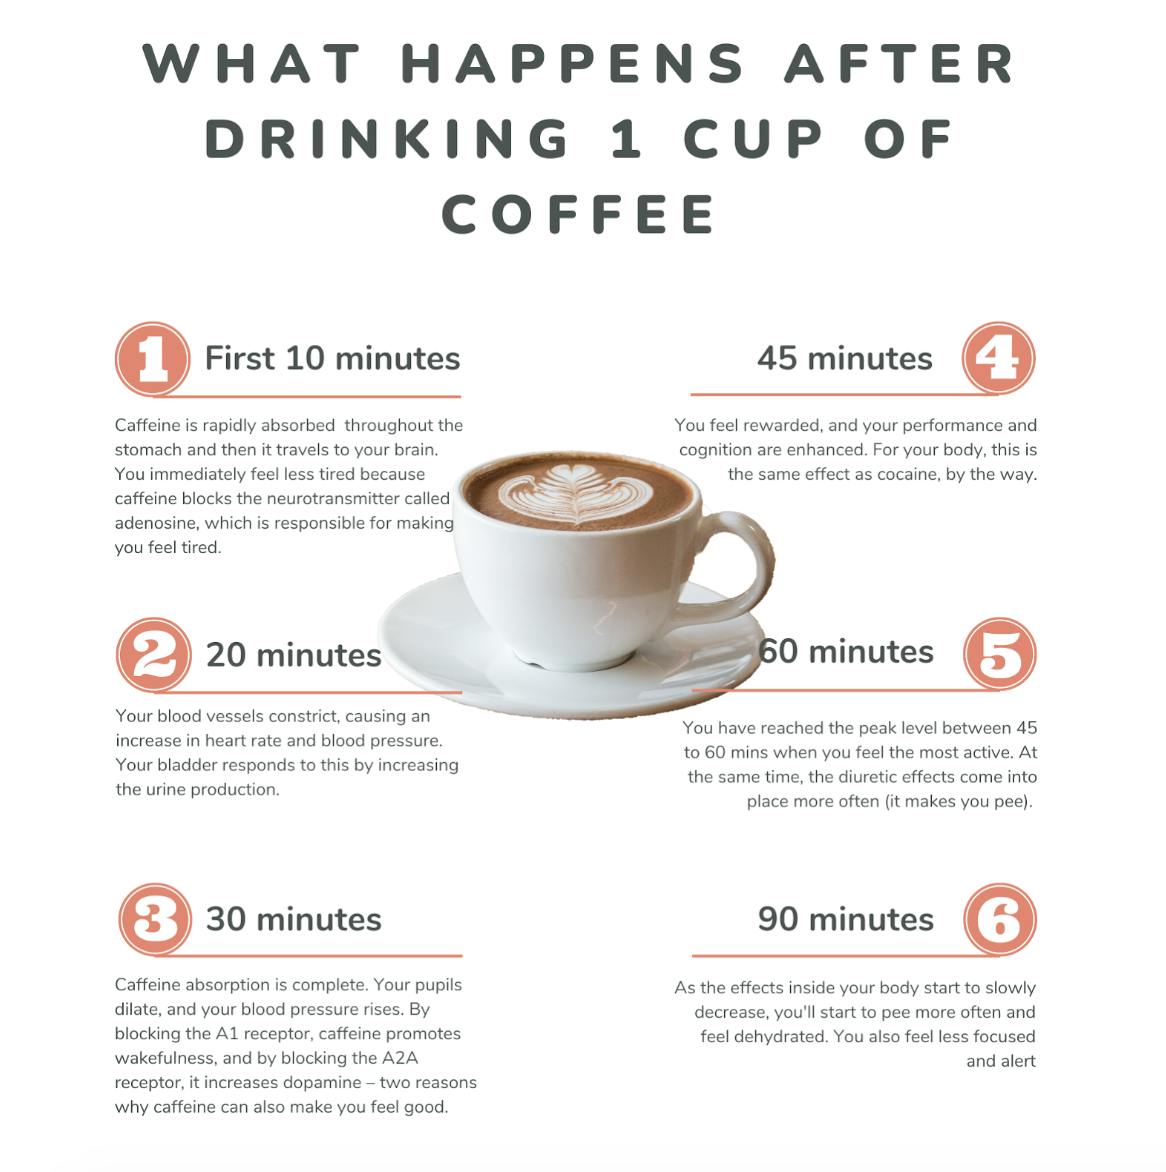 What Happens To Your Body 1 Hour After Drinking Coffee | Medino